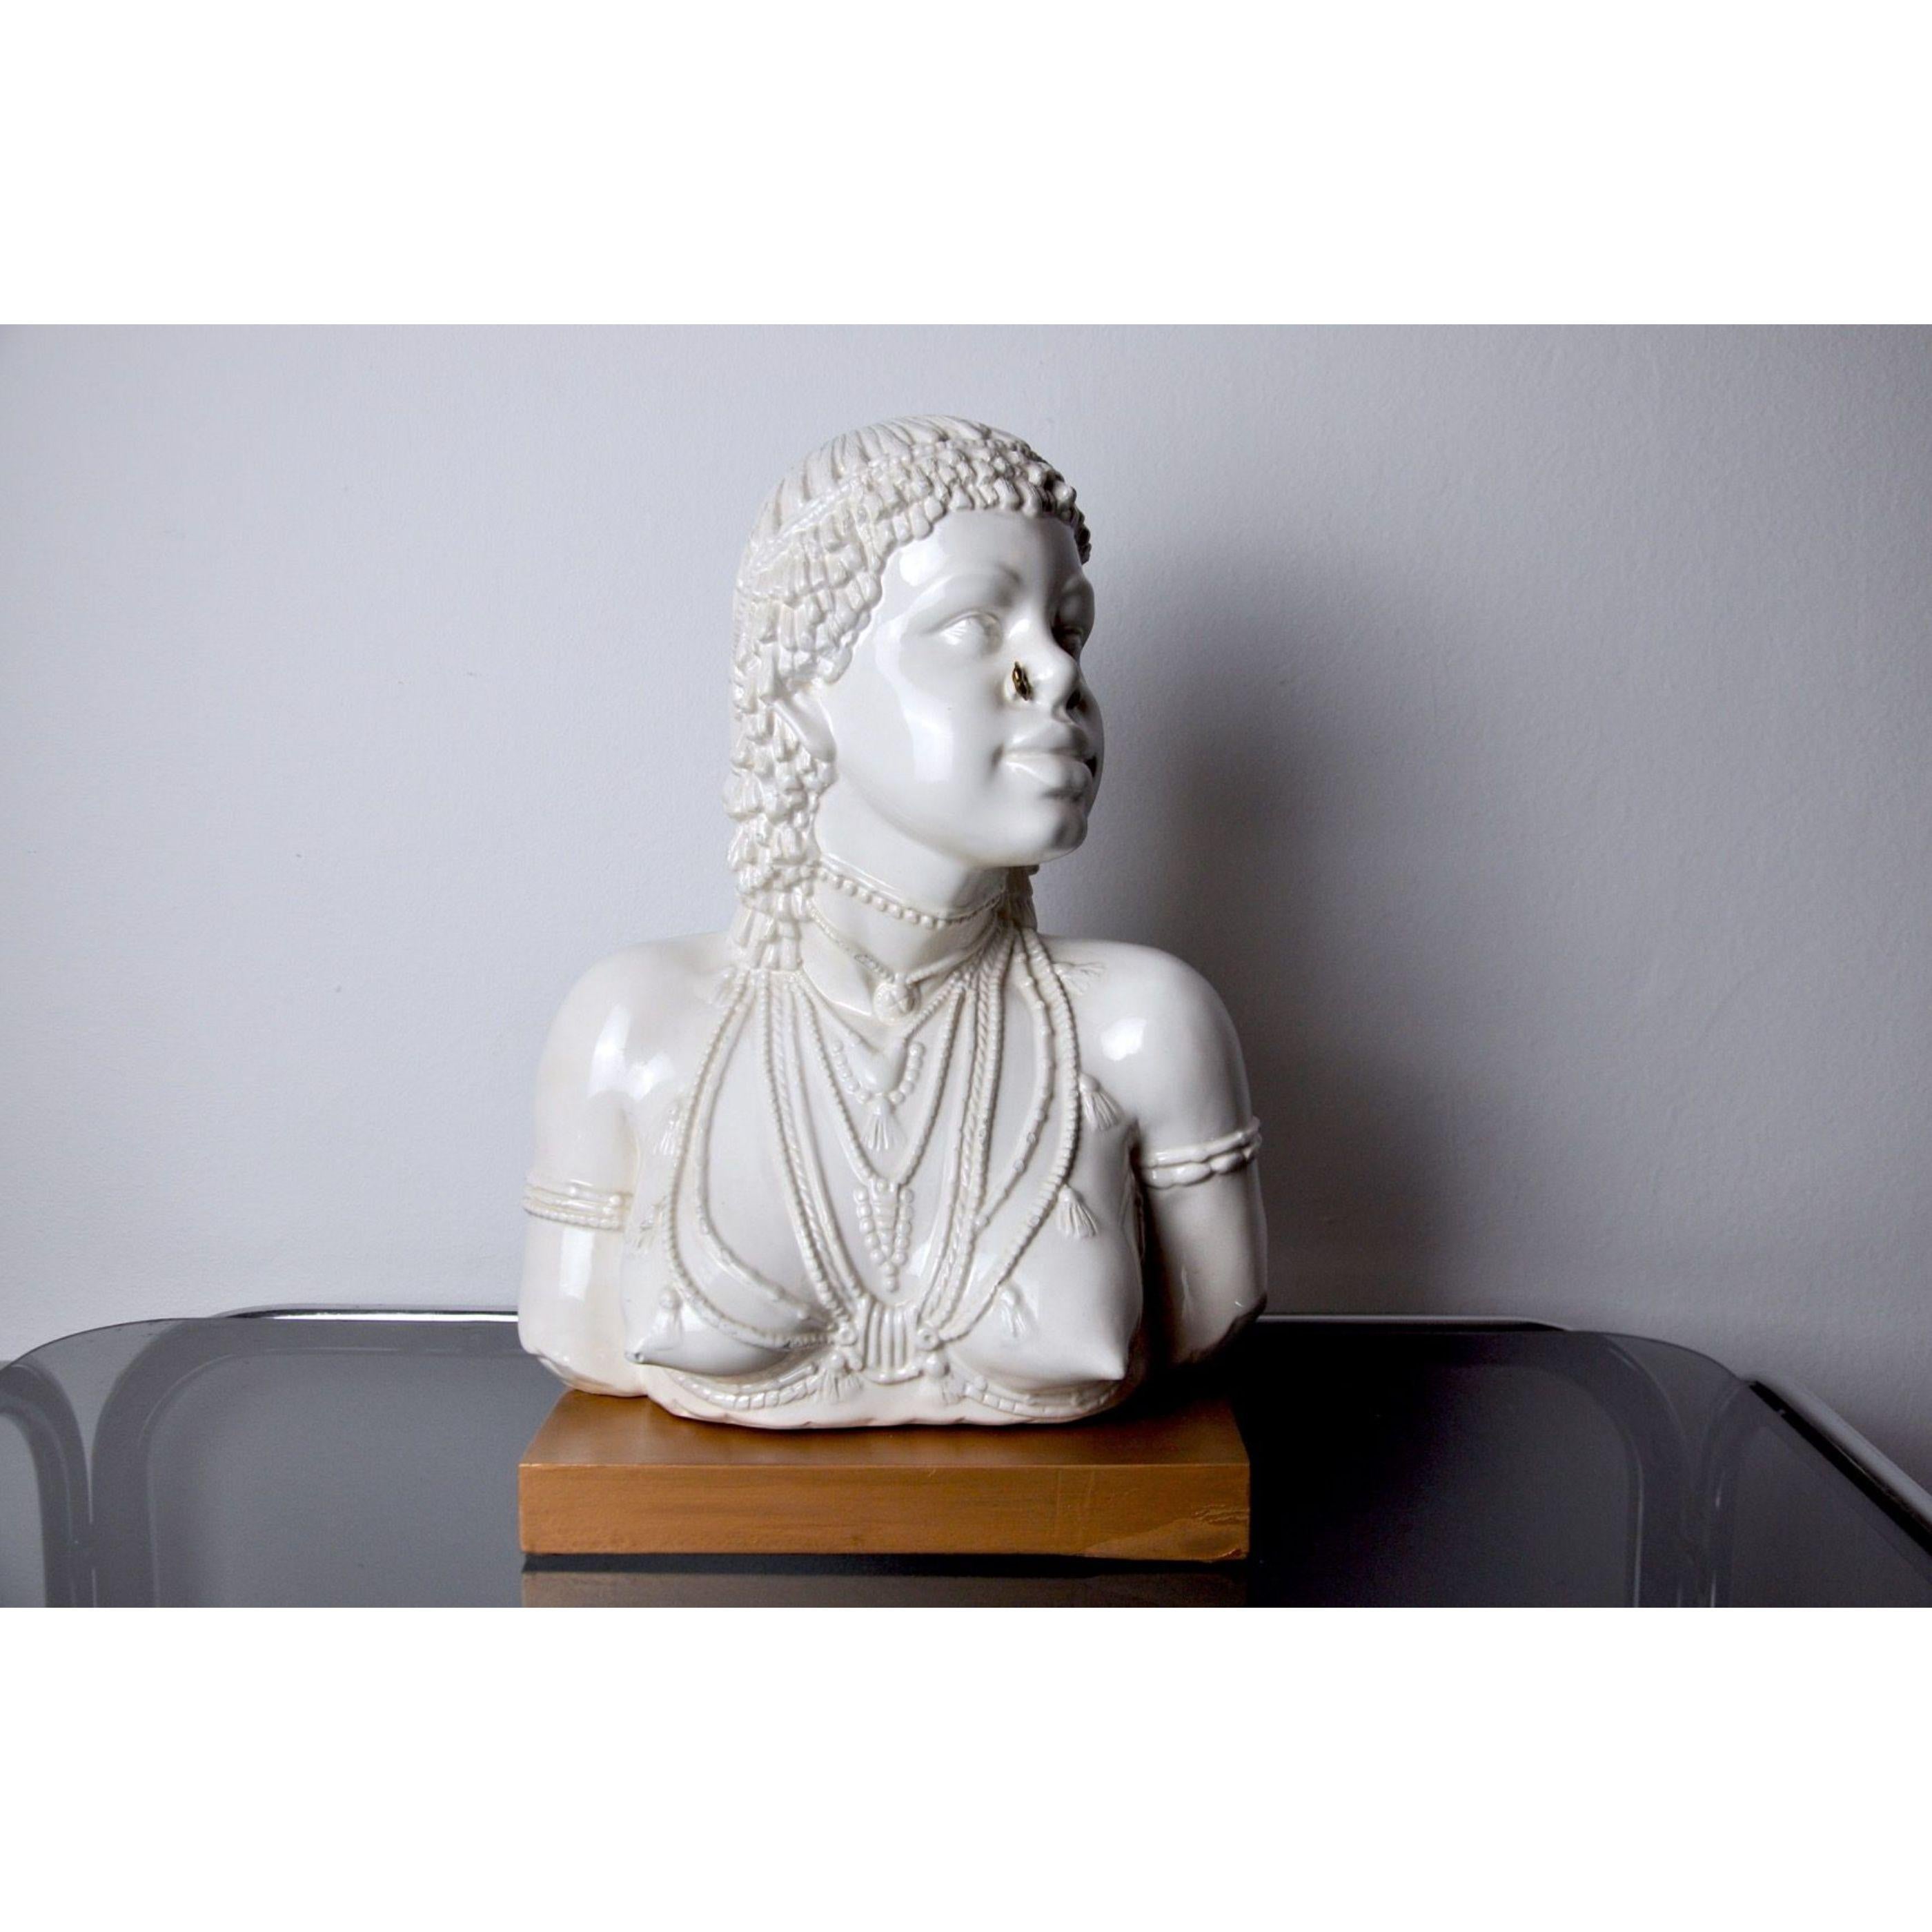 Very nice and large white ceramic bust representing an aborigine. This bust was designed and produced in Italy in the 70s. Wooden base, golden metal piercing. A rare decorative object because of its design and its large size. 

 